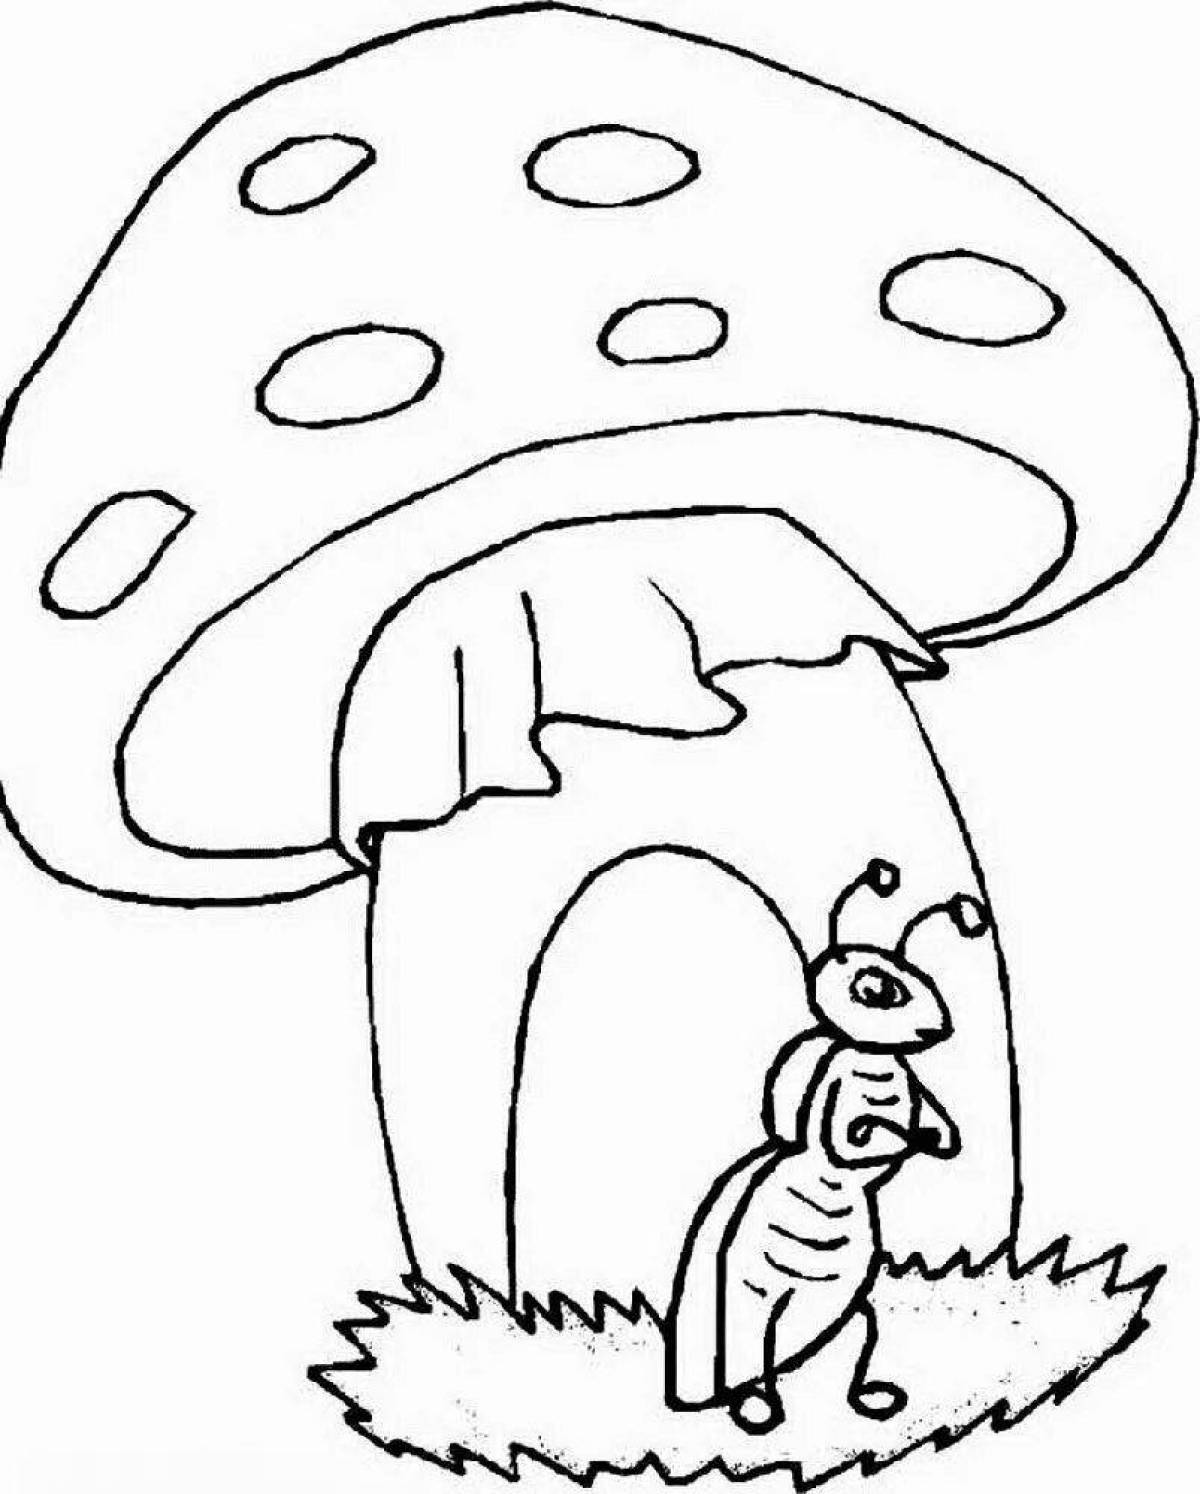 Glorious coloring fairy tale under the mushroom